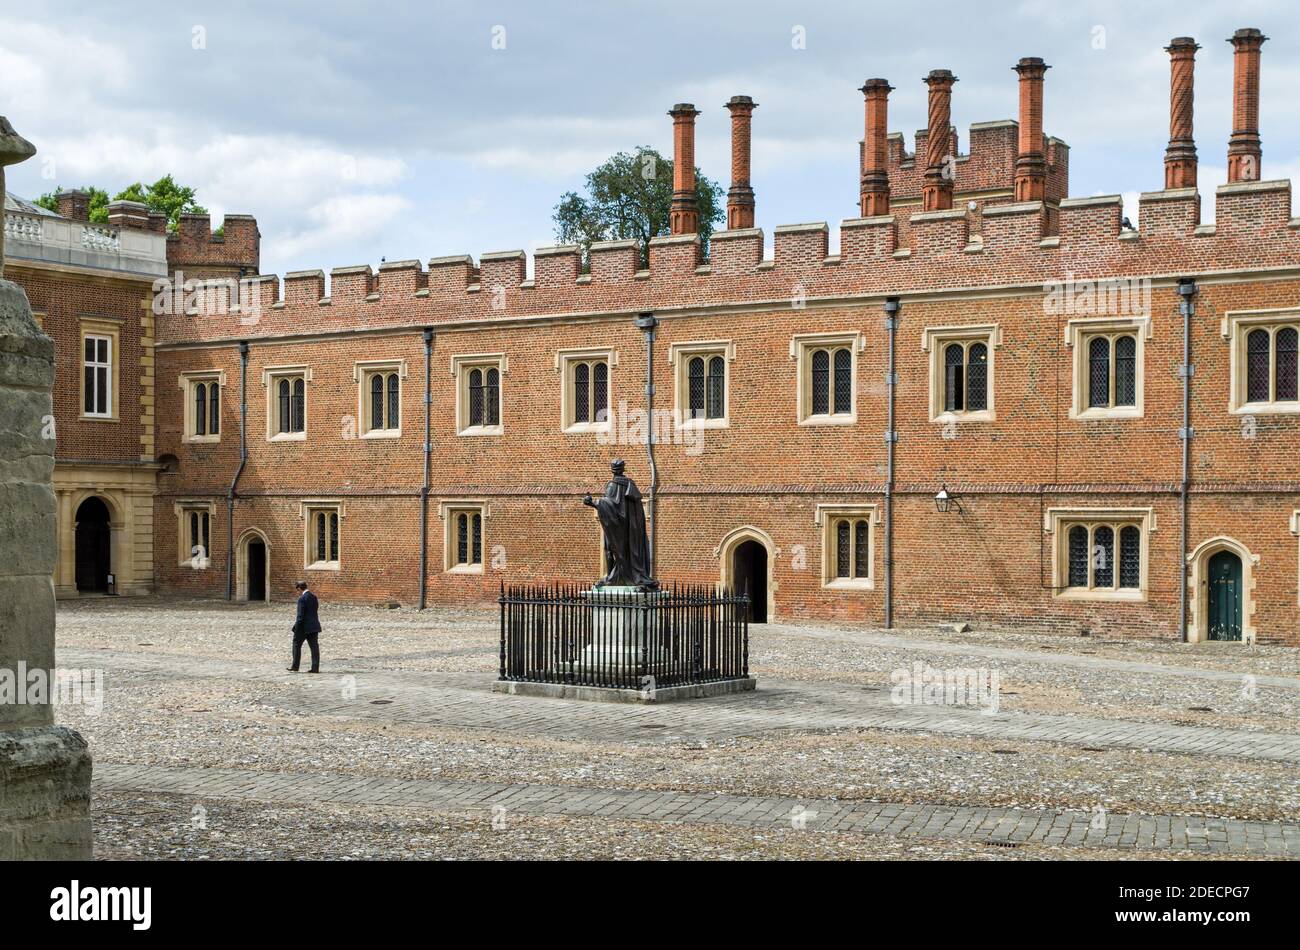 Eton College, a public school for boys, Eton, Berkshire, UK; view of the quadrangle with master waling across. Stock Photo